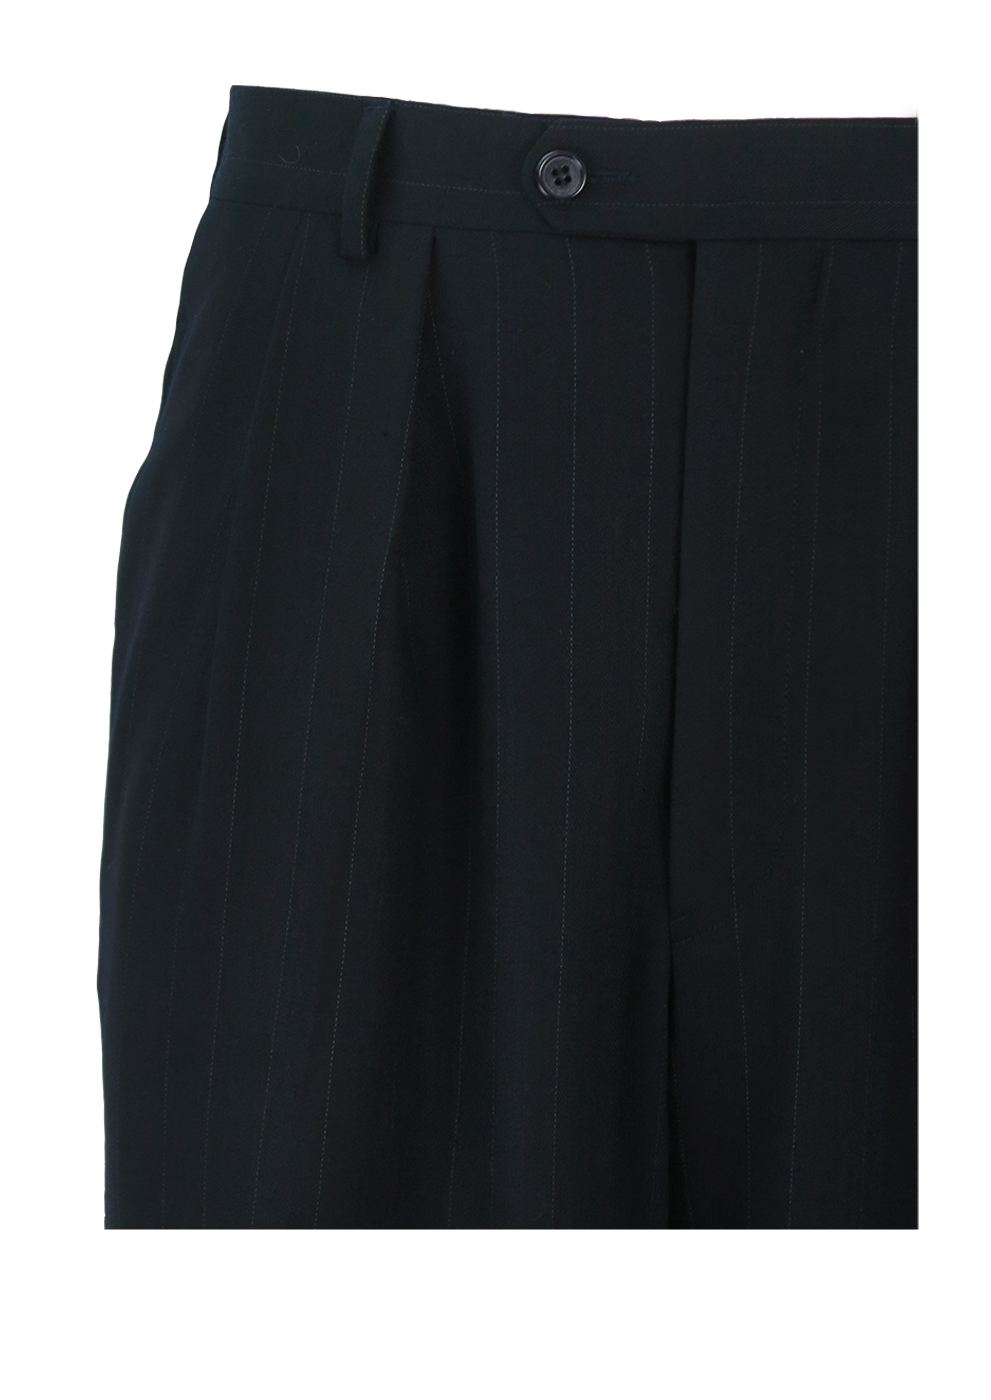 Black Fine Pinstripe Wool Trousers with Pleat Front & Turn Ups - 31 ...